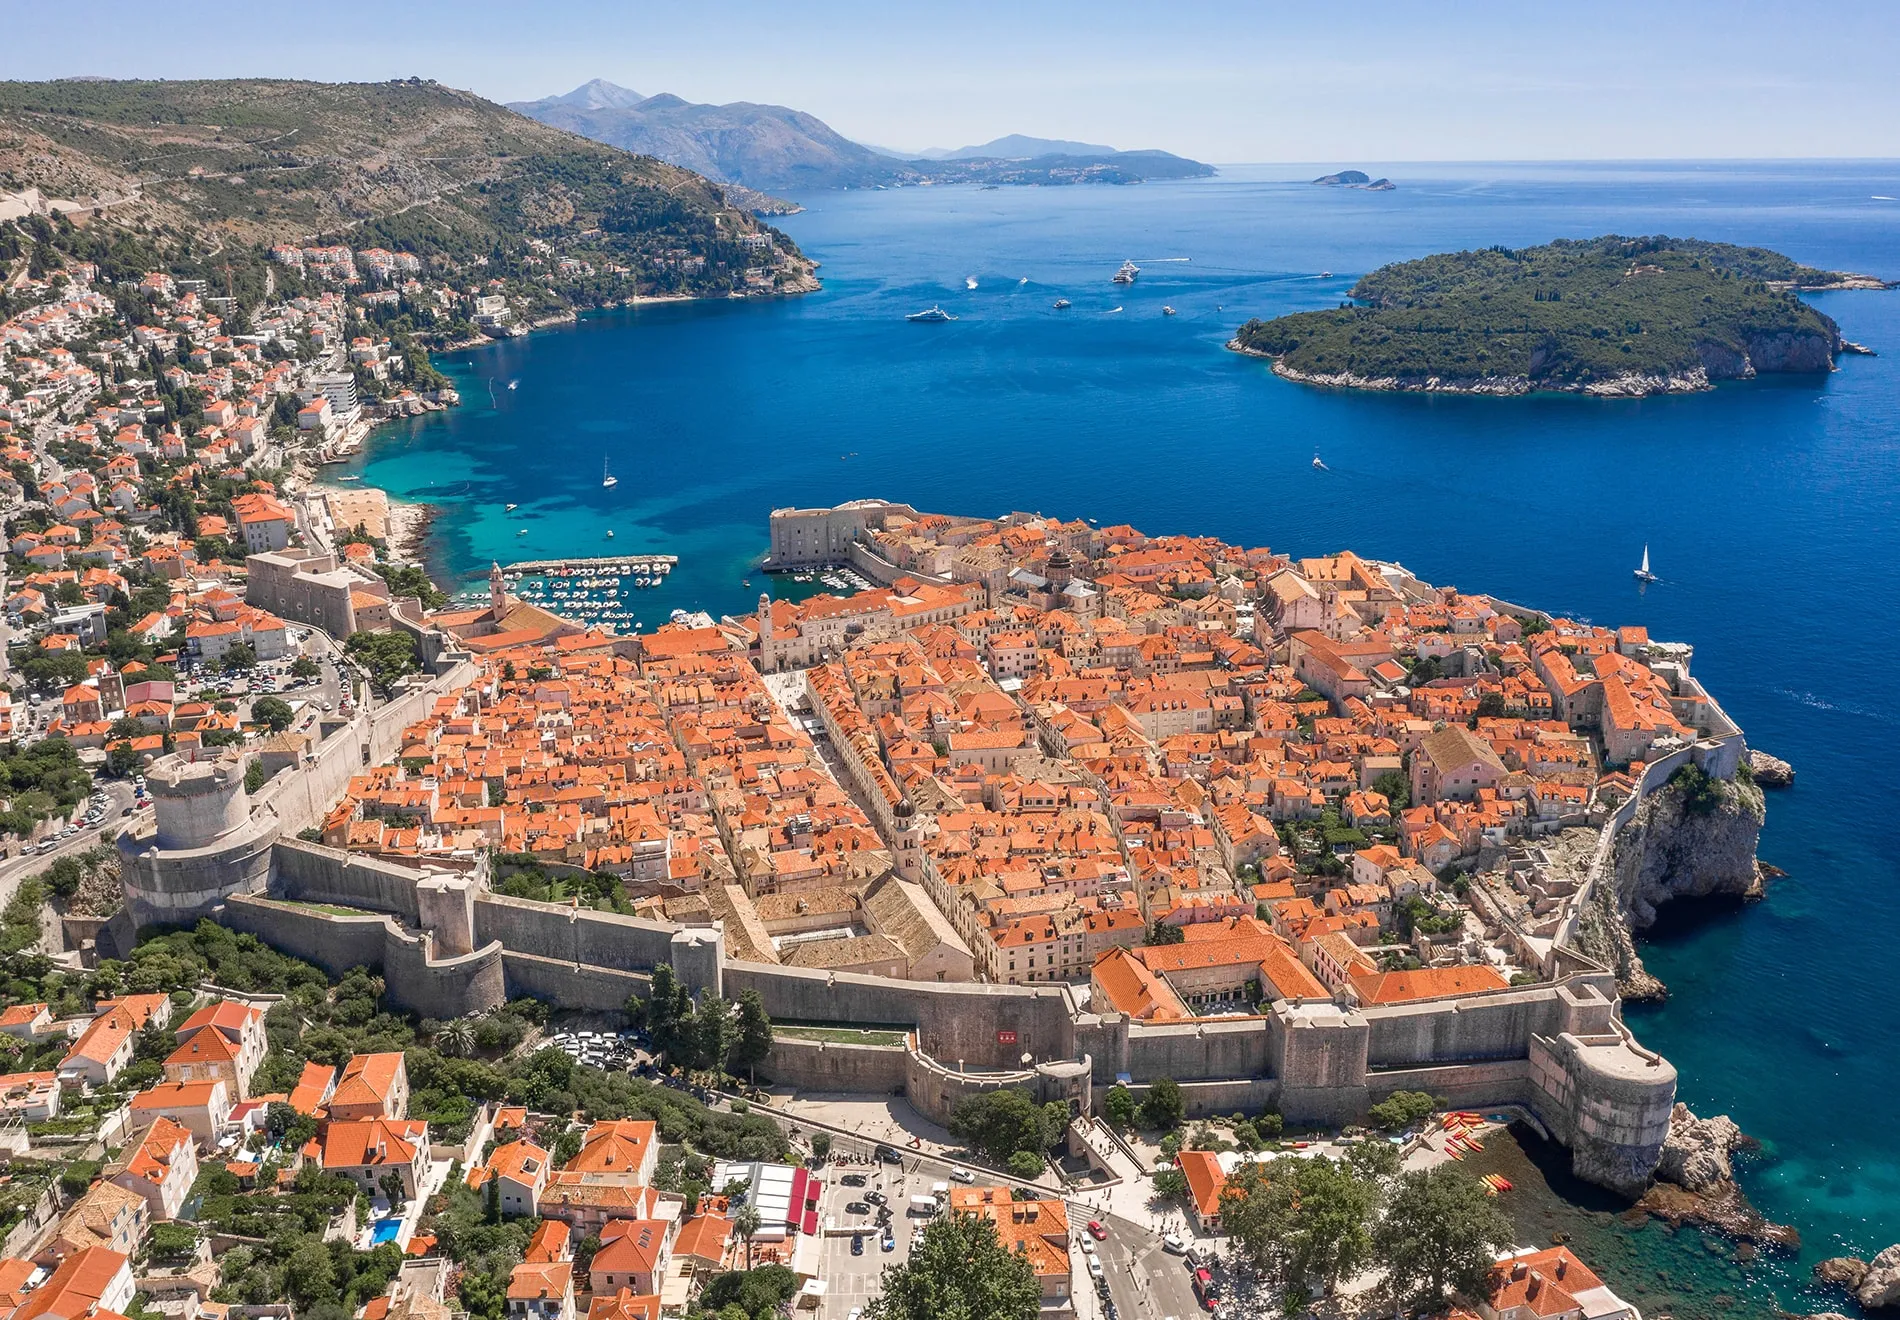 Which are the most must-visit places in Croatia during a yacht charter